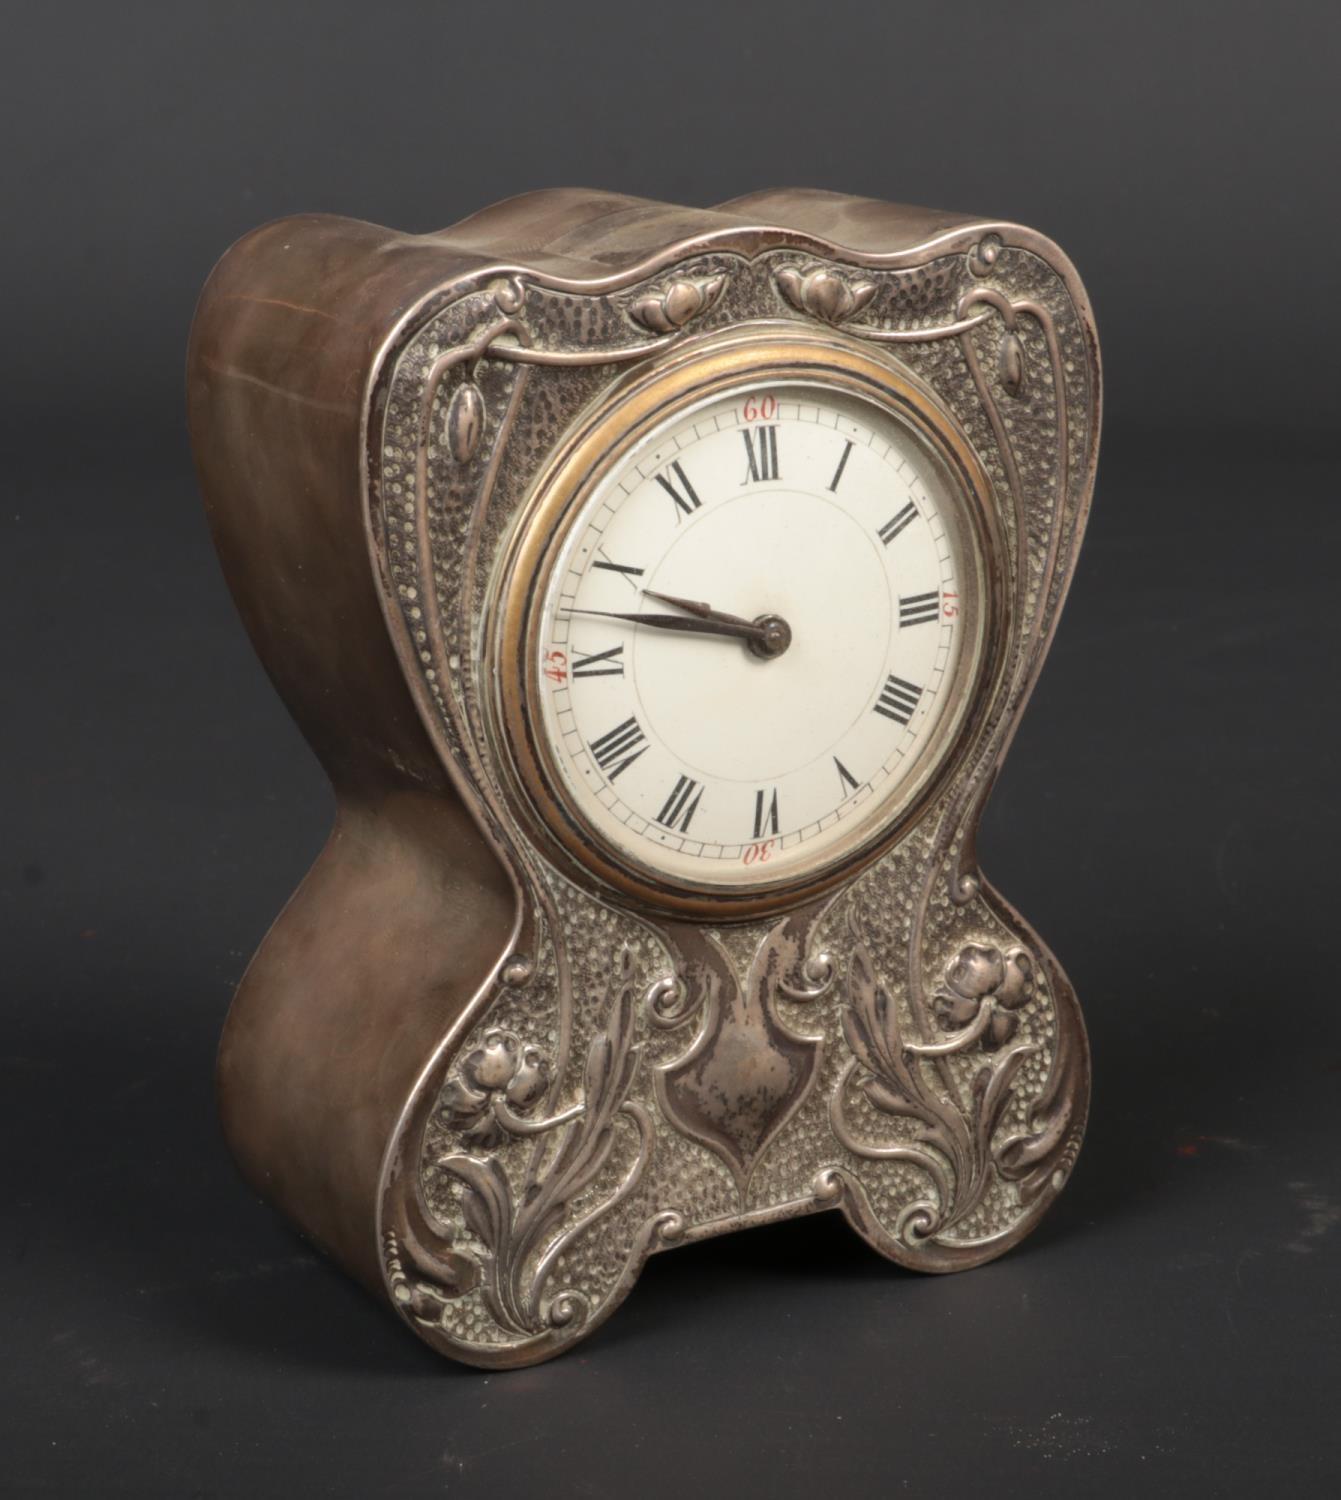 An Art Nouveau silver cased desk clock by Douglas Clock Co. Decorated in relief with stylized